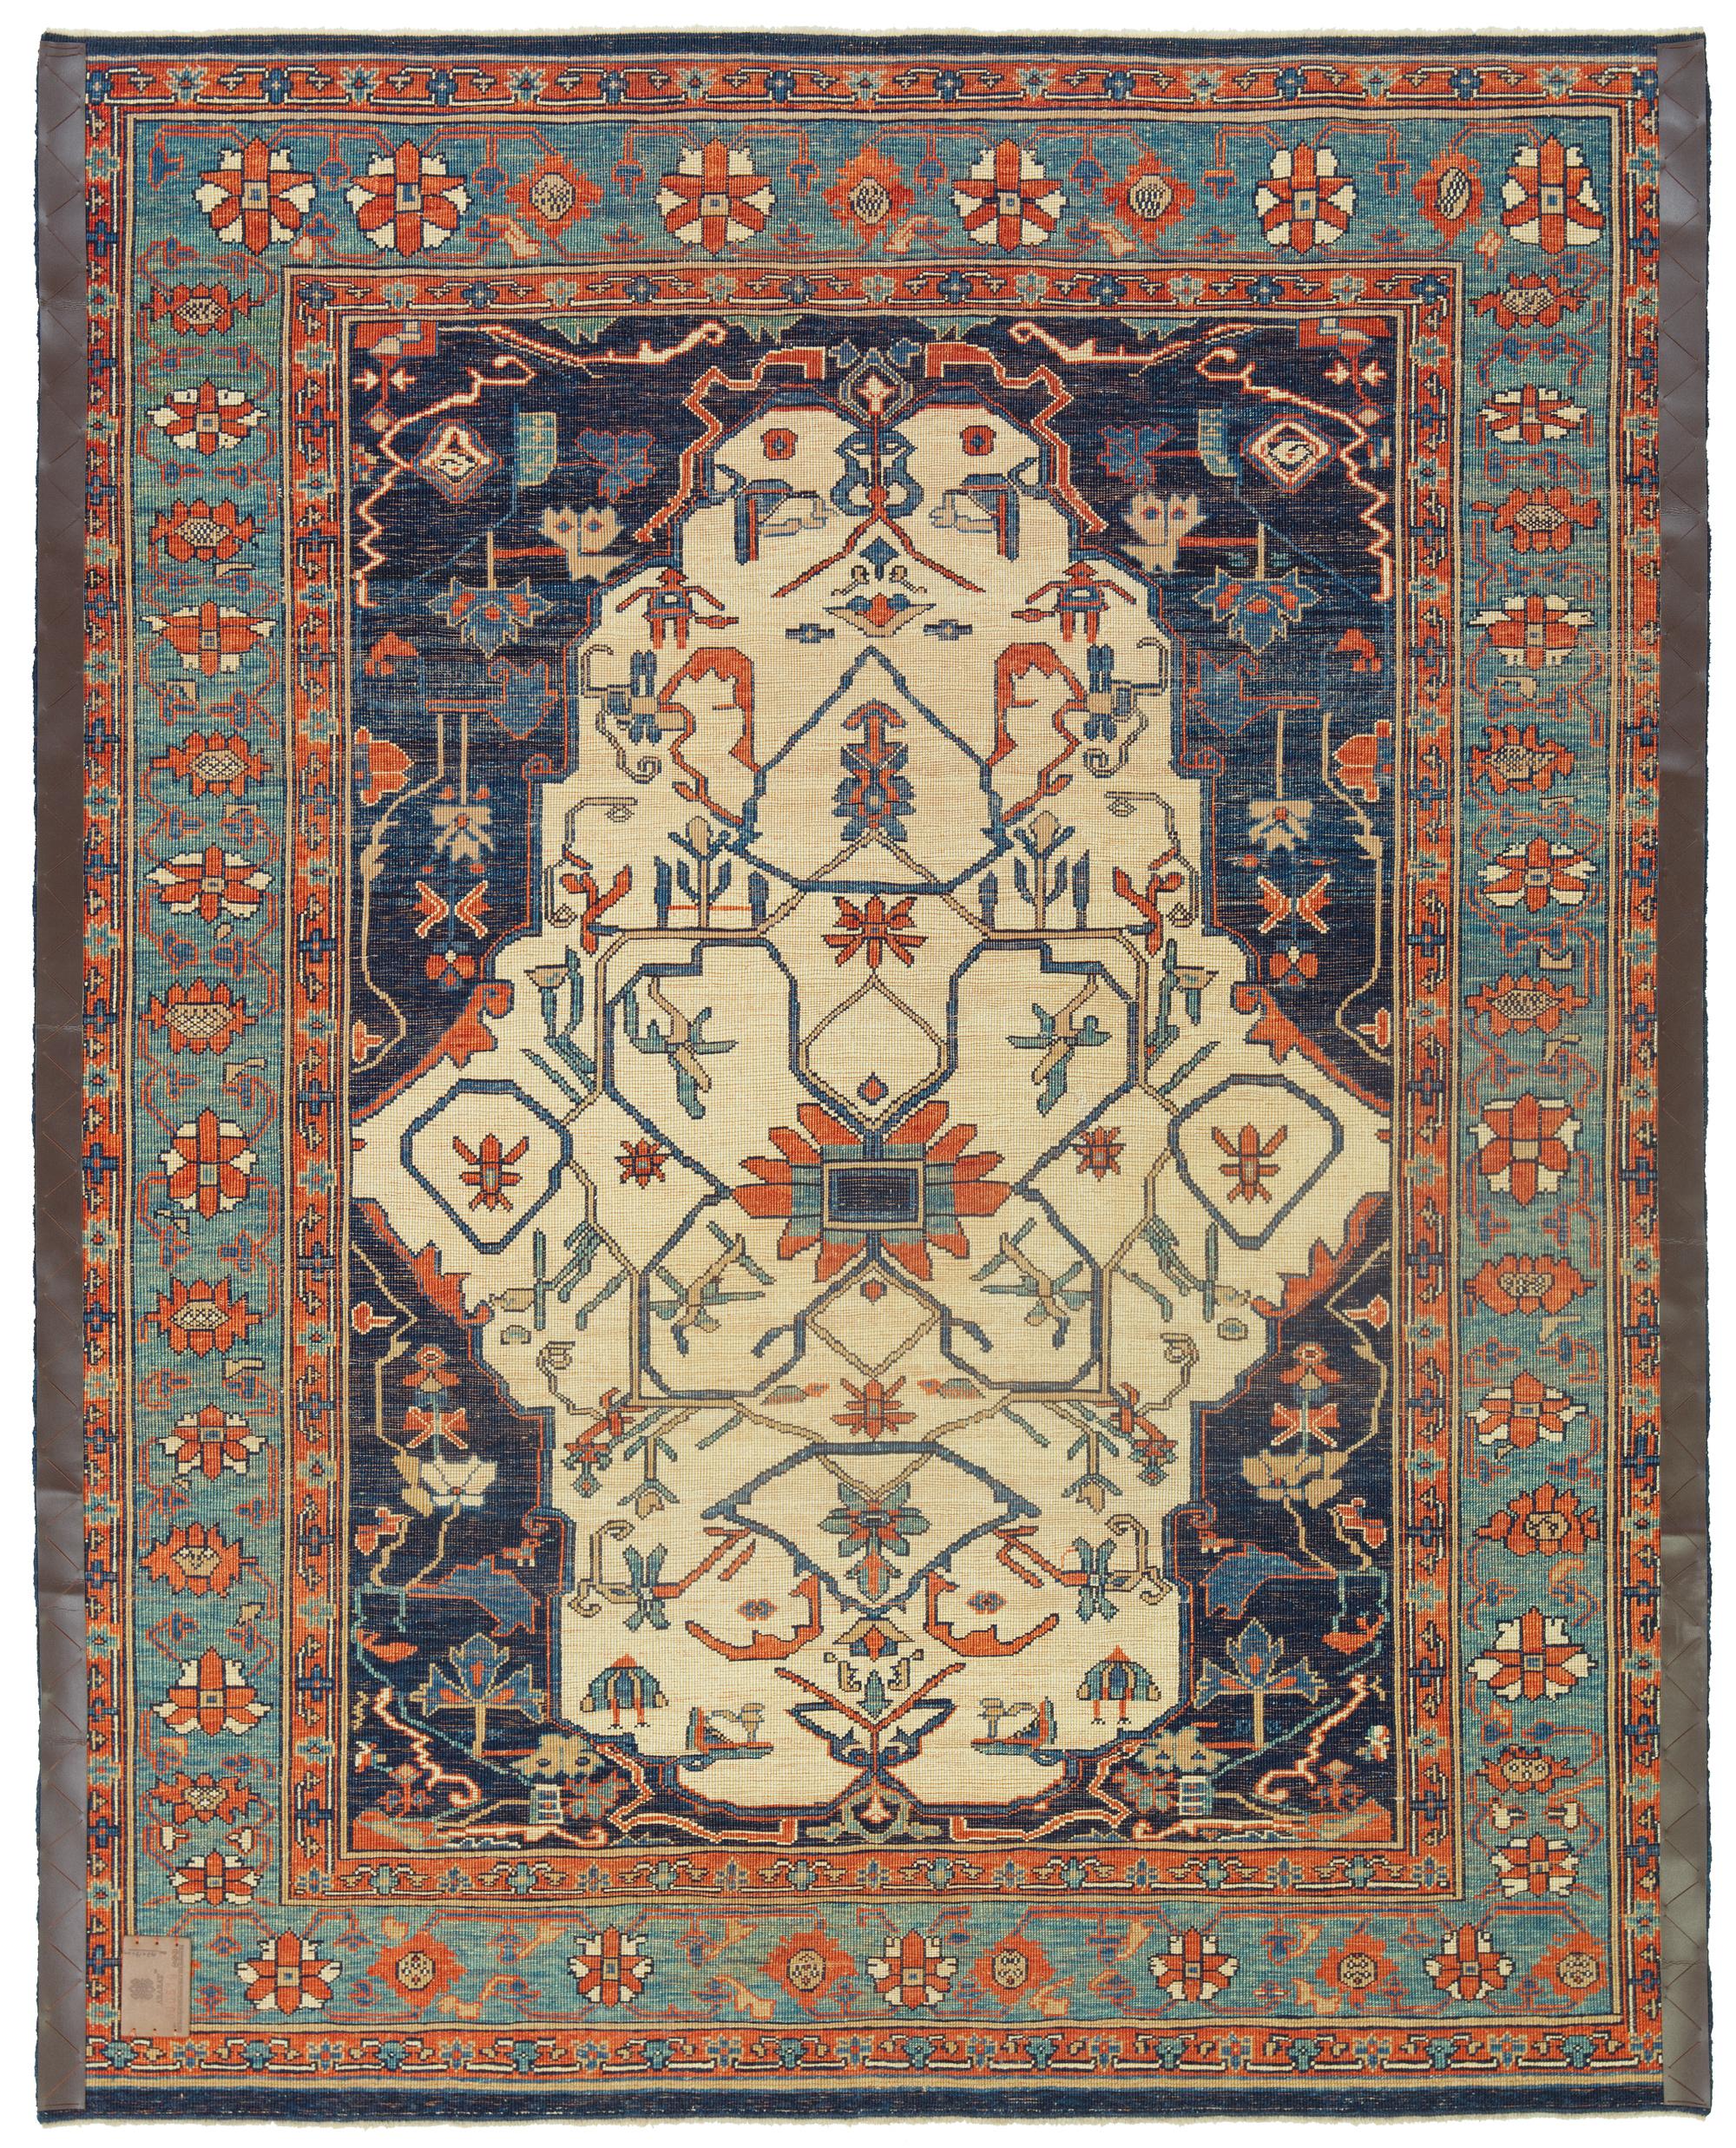 Contemporary Ararat Rugs Heriz White Ground Rug - 19th C. Persian Revival Carpet Natural Dyed For Sale